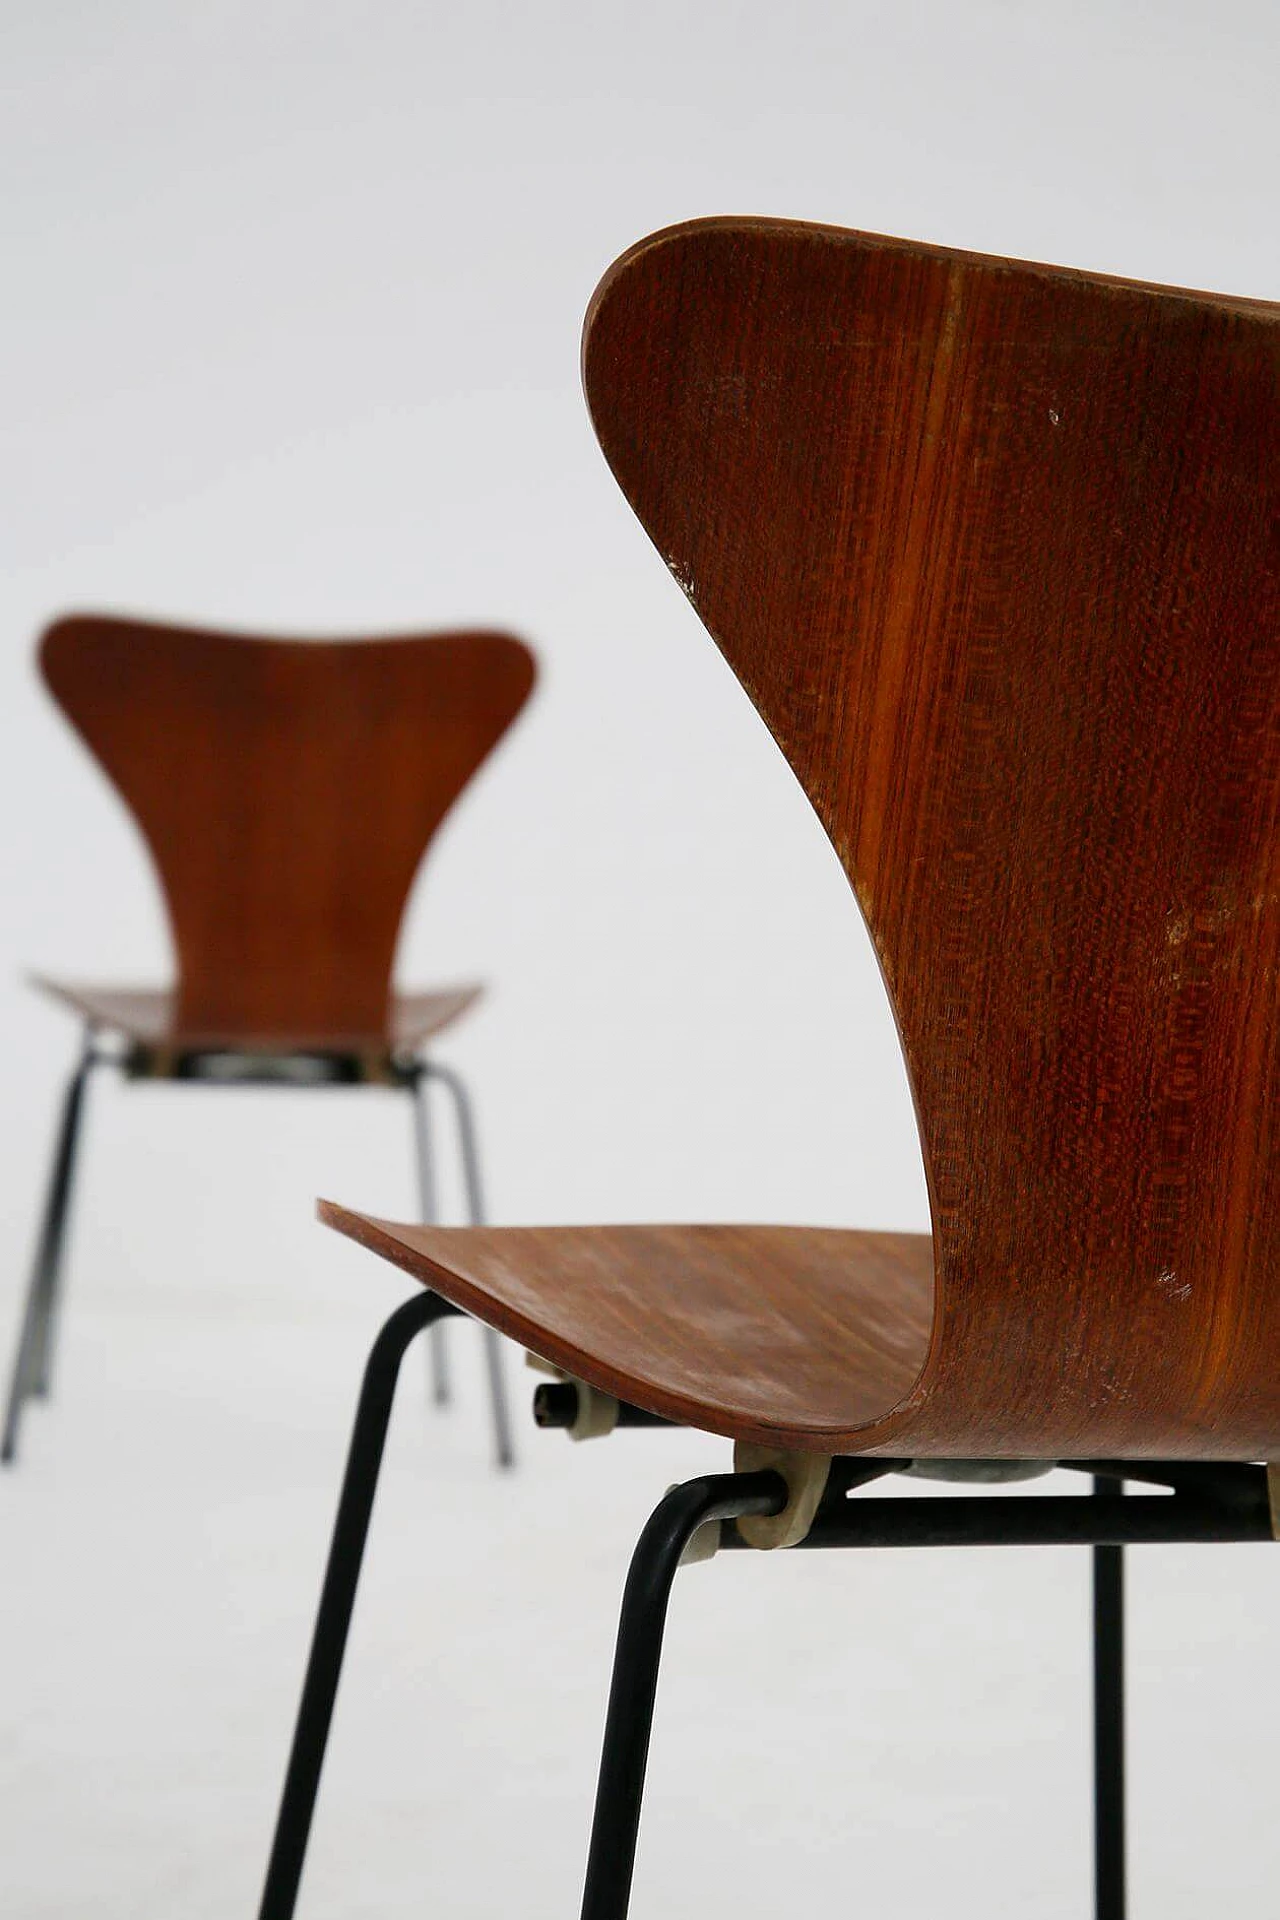 6 Chairs by Arne Jacobsen model Butterfly for the Brazilian airline Varig, 1950s 1387804